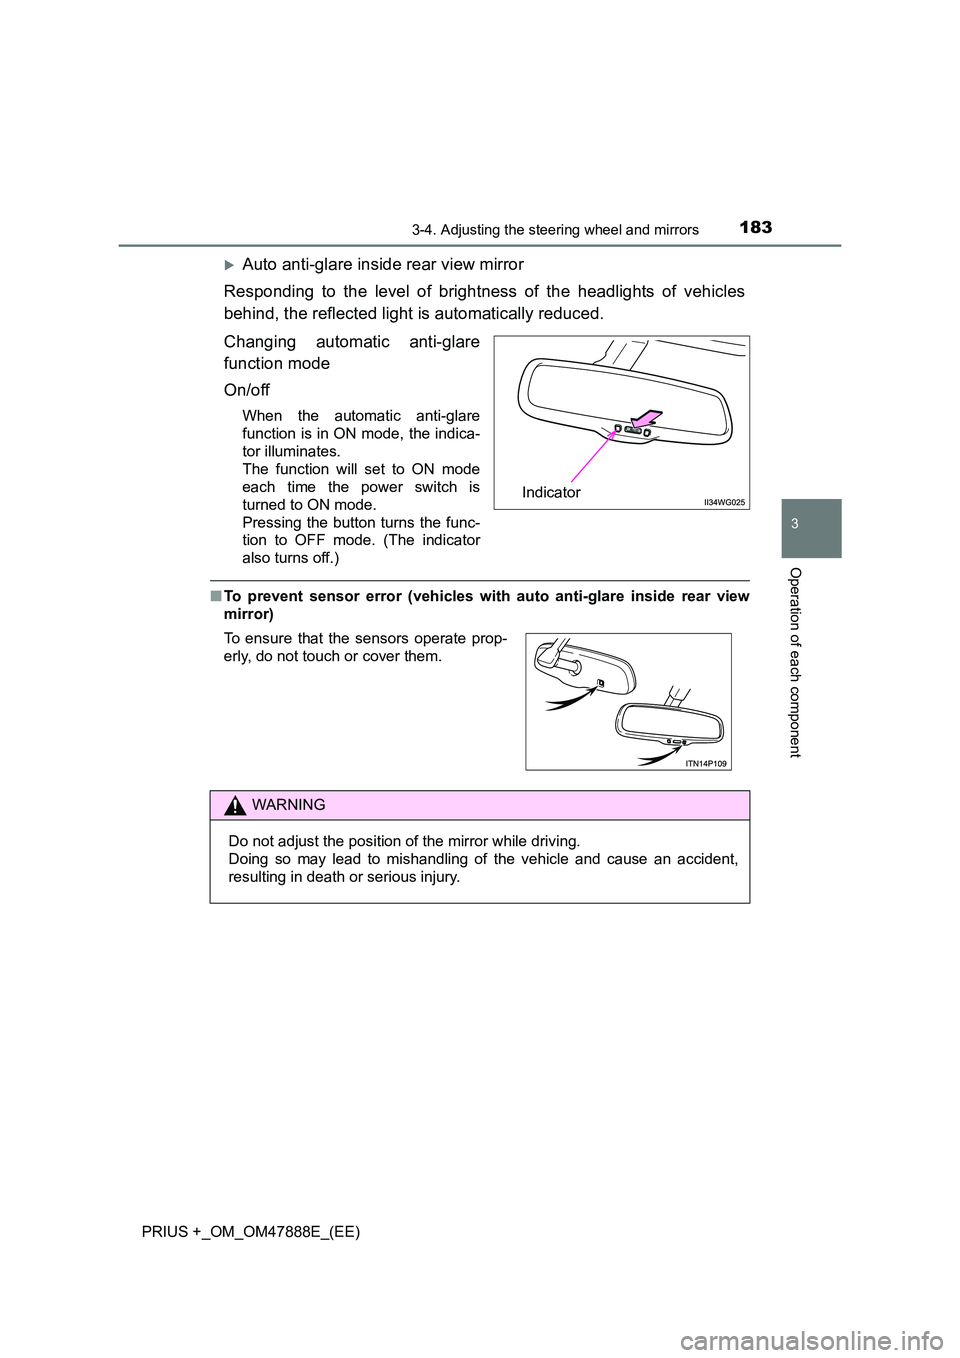 TOYOTA PRIUS PLUS 2014  Owners Manual 1833-4. Adjusting the steering wheel and mirrors
3
Operation of each component
PRIUS +_OM_OM47888E_(EE)
�XAuto anti-glare inside rear view mirror
Responding to the level of brightness of the headlight